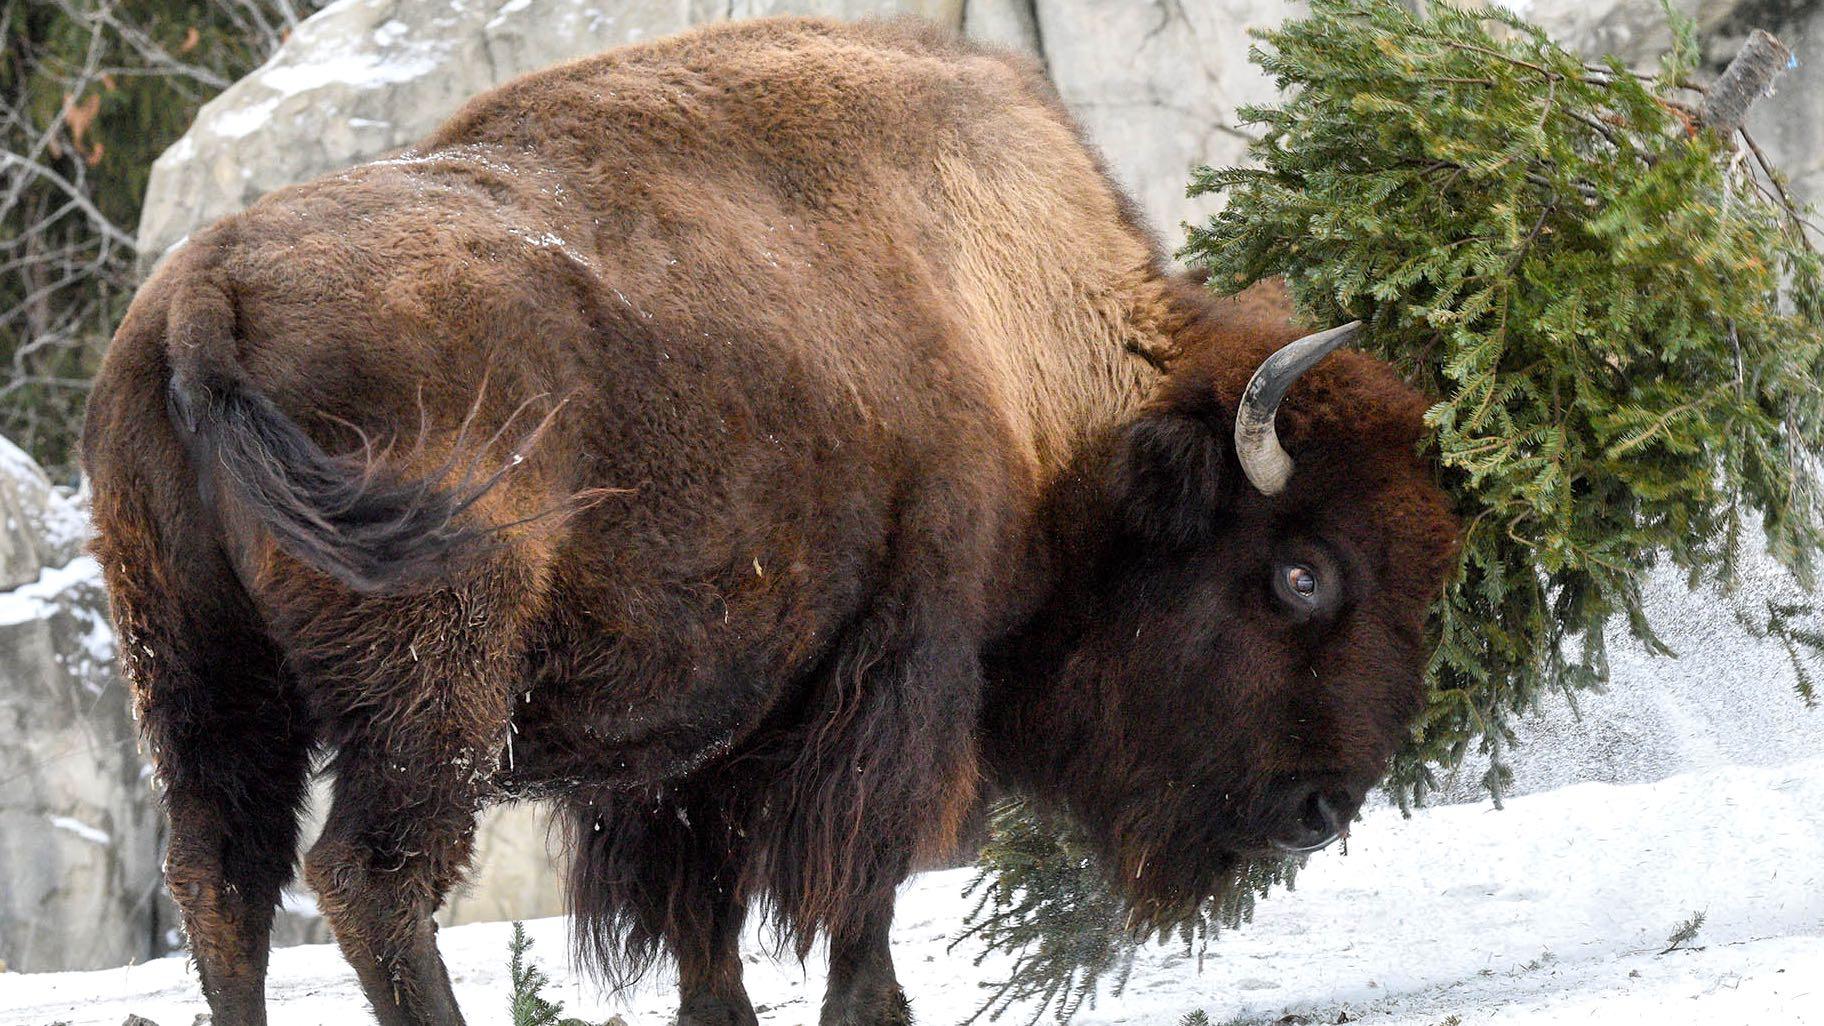 A bison at Brookfield Zoo enjoys a brush with a recycled Christmas tree. (Jim Schulz / CZS-Brookfield Zoo)